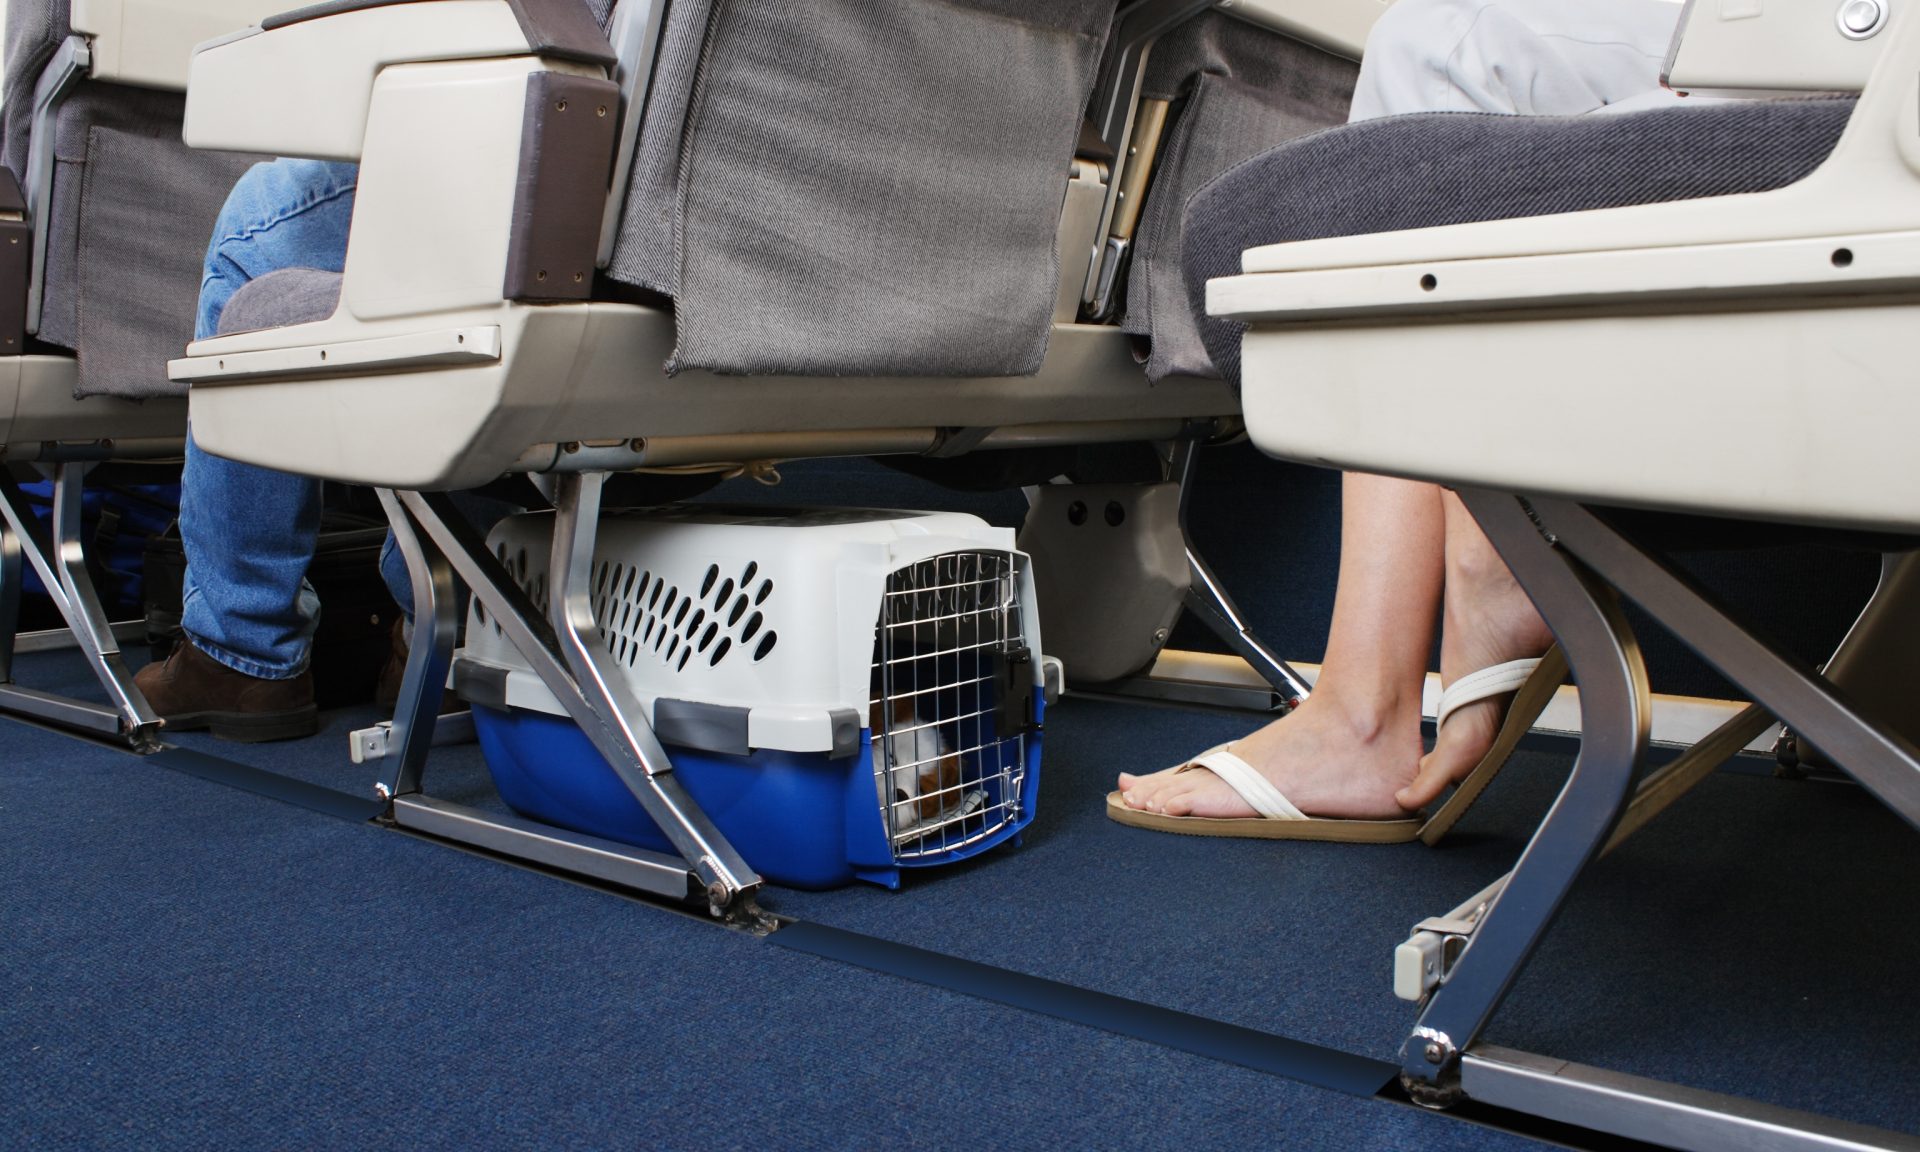 brussels airline pet travel